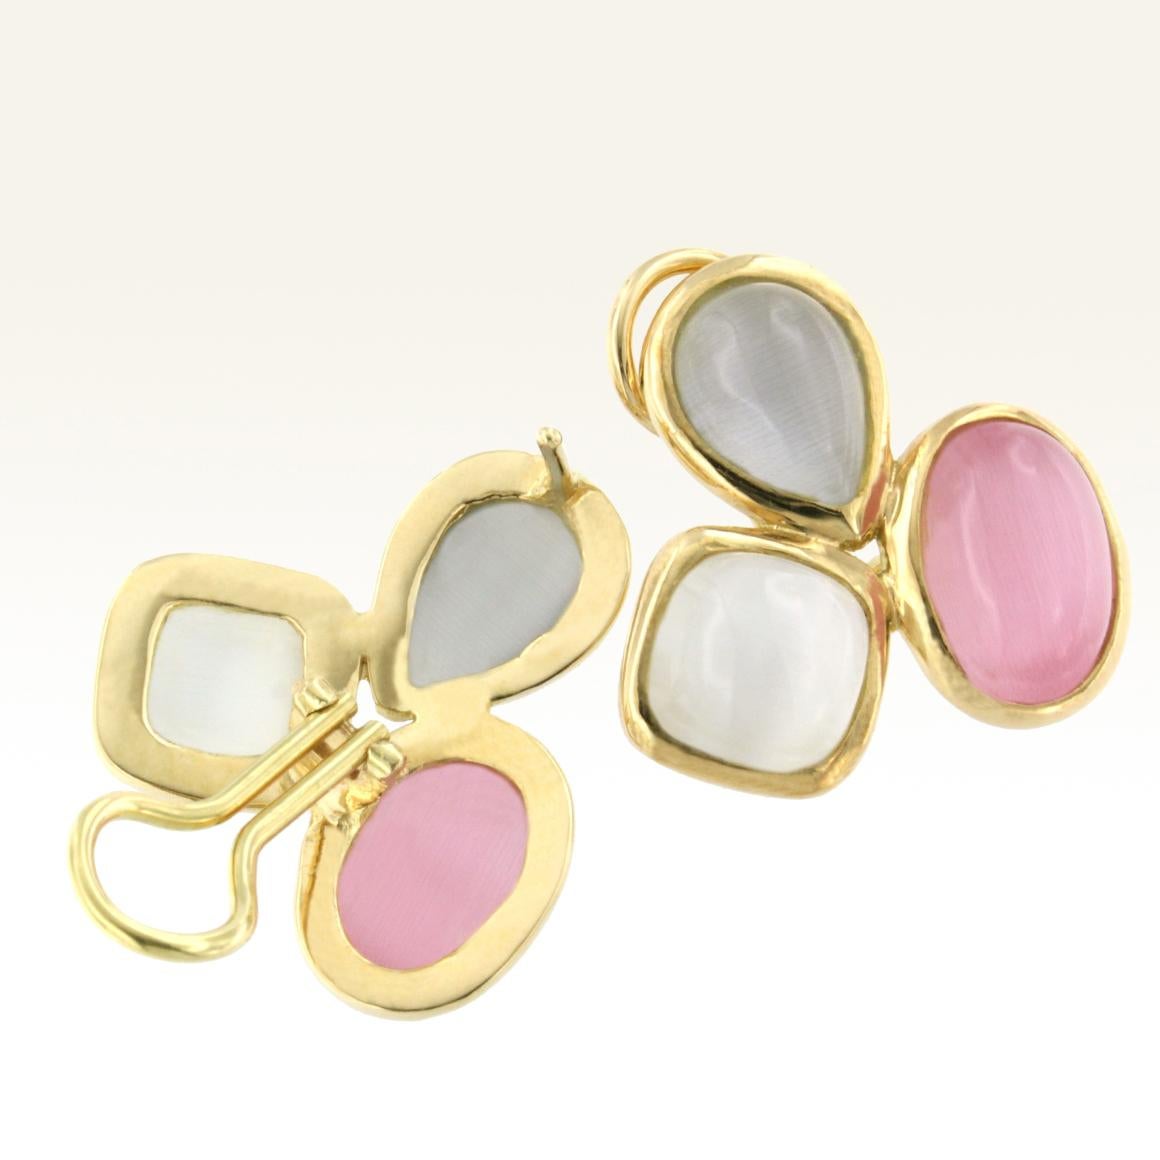 18 Karat Yellow Gold with Colored Moonstone Ring Earrings and Pendant Set For Sale 4